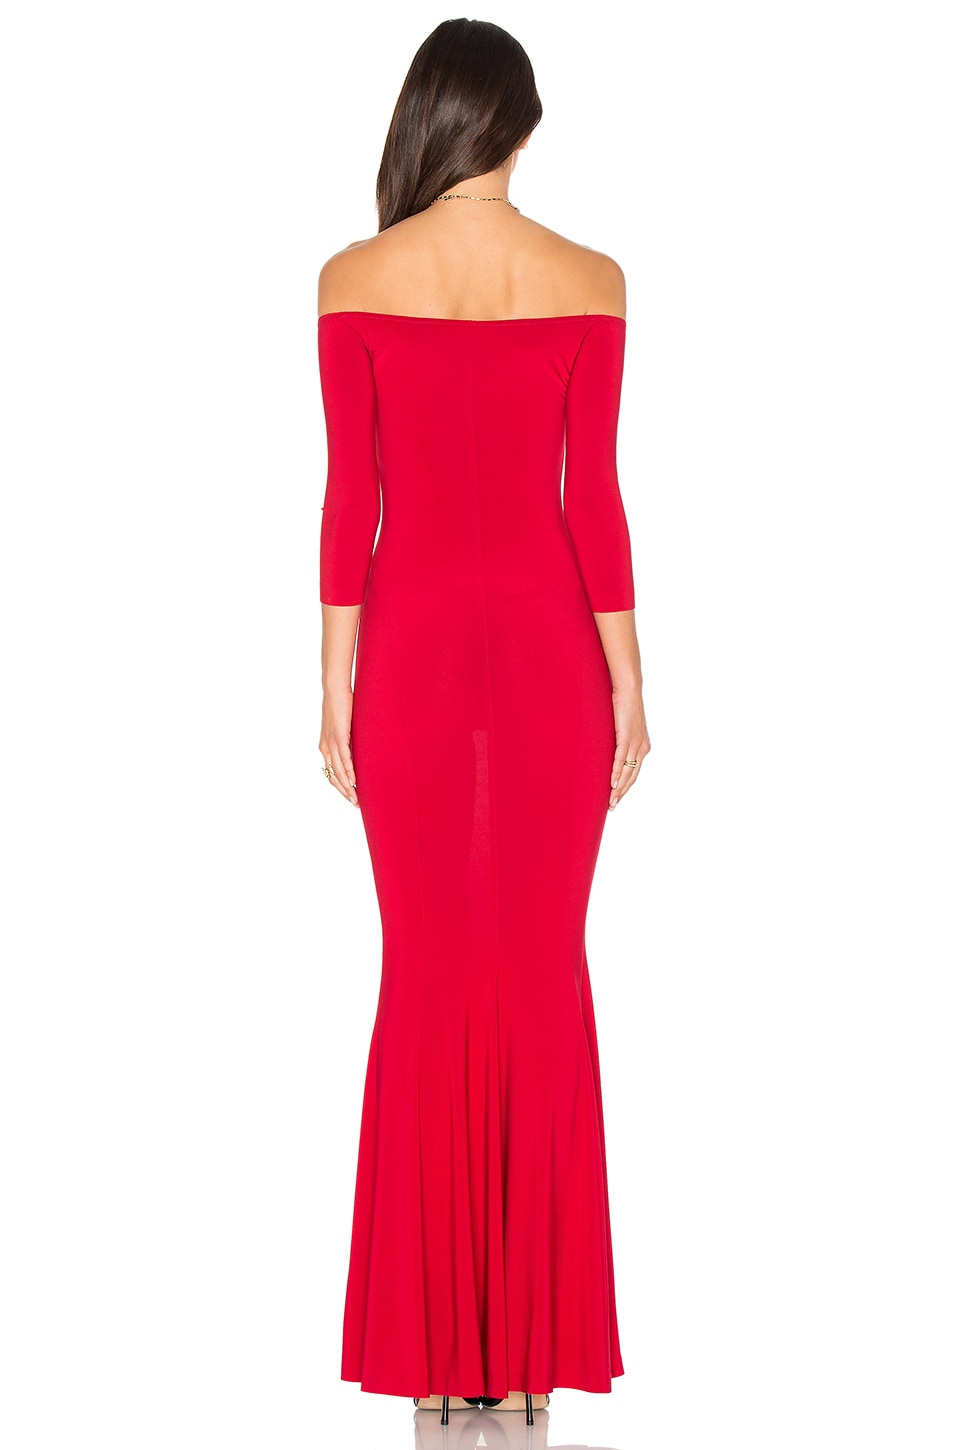 NORMA KAMALI Off The Shoulder Fishtail Gown in Red | ModeSens